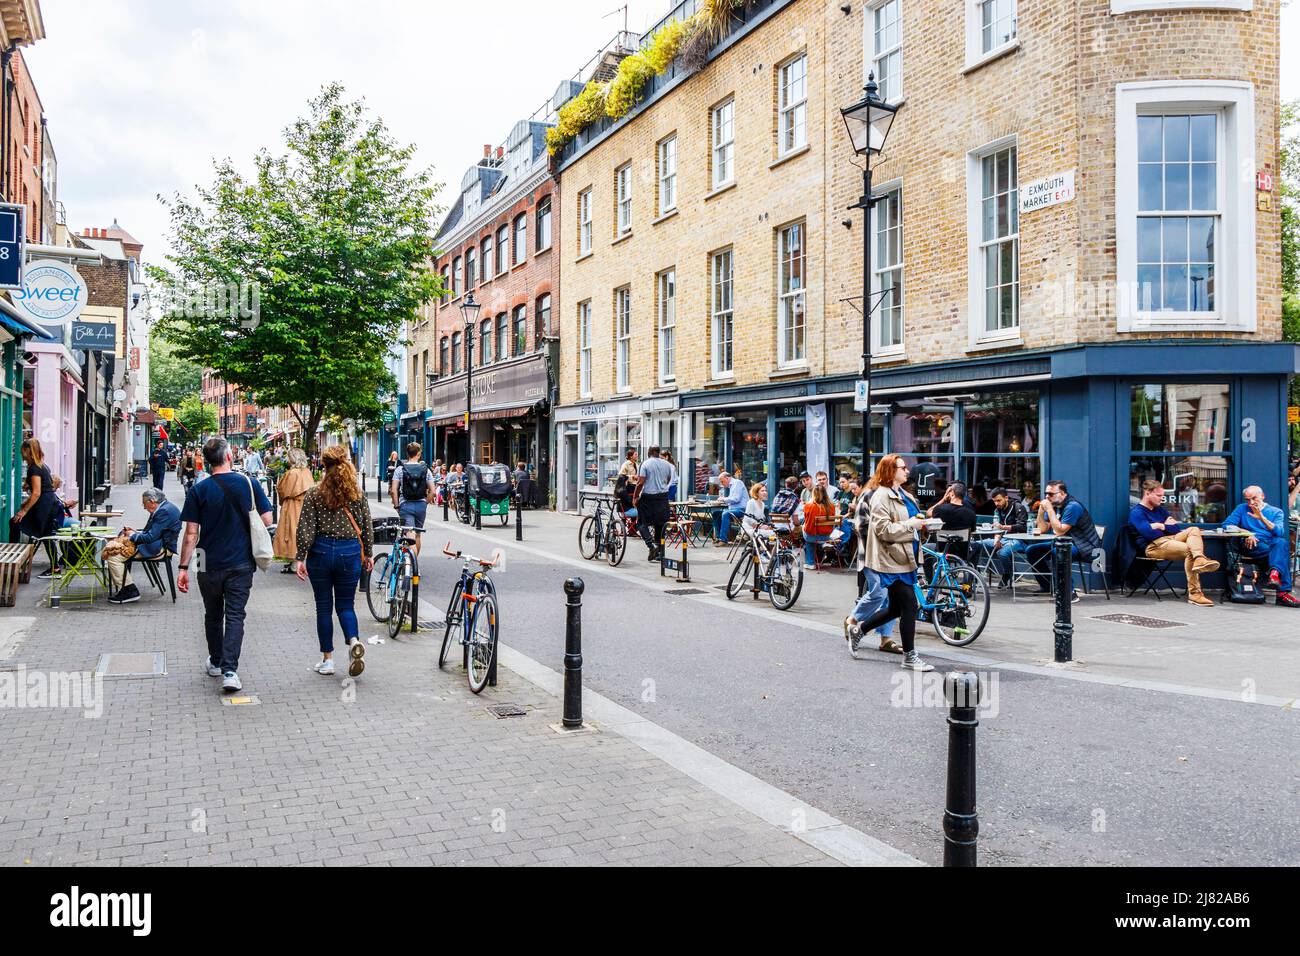 The numerous food outlets, bars, restaurants and shops of Exmouth Market are a popular lunchtime venue for workers in Clerkenwell, London, UK Stock Photo